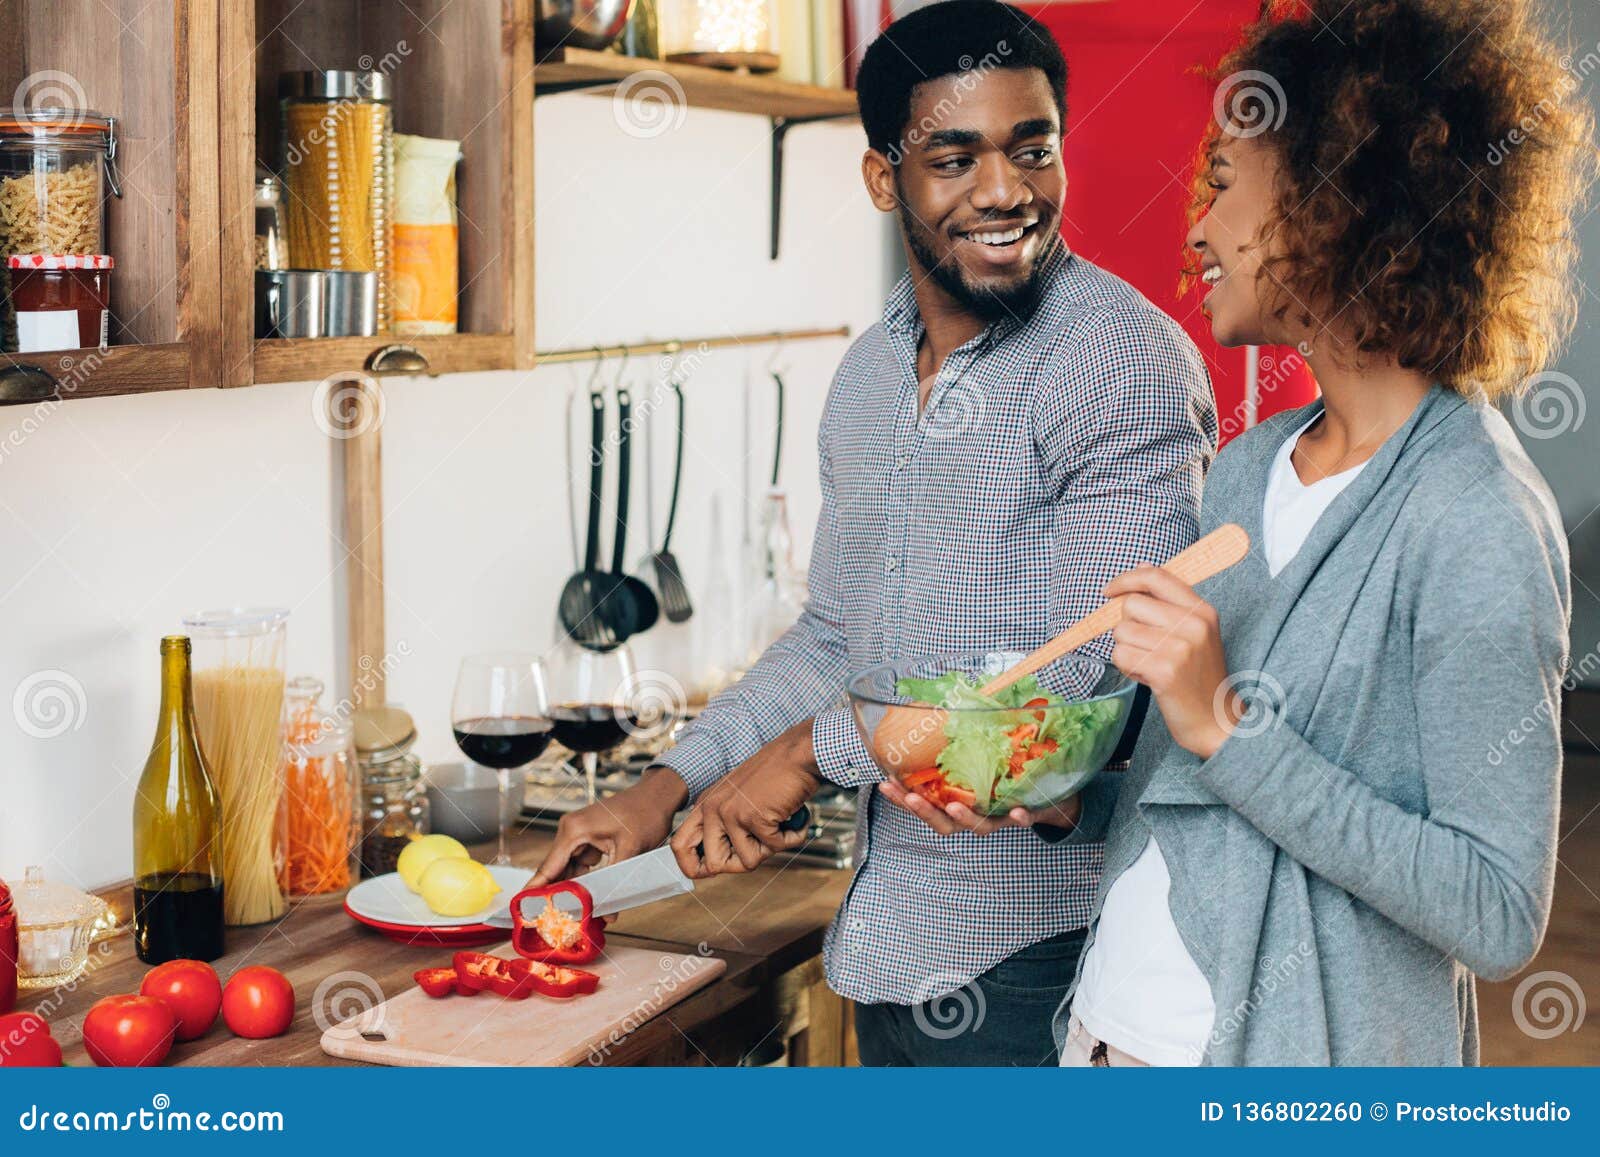 Vegetarian African American Couple Cooking Salad In Kitchen Stock Photo Image Of Chopping Family 136802260